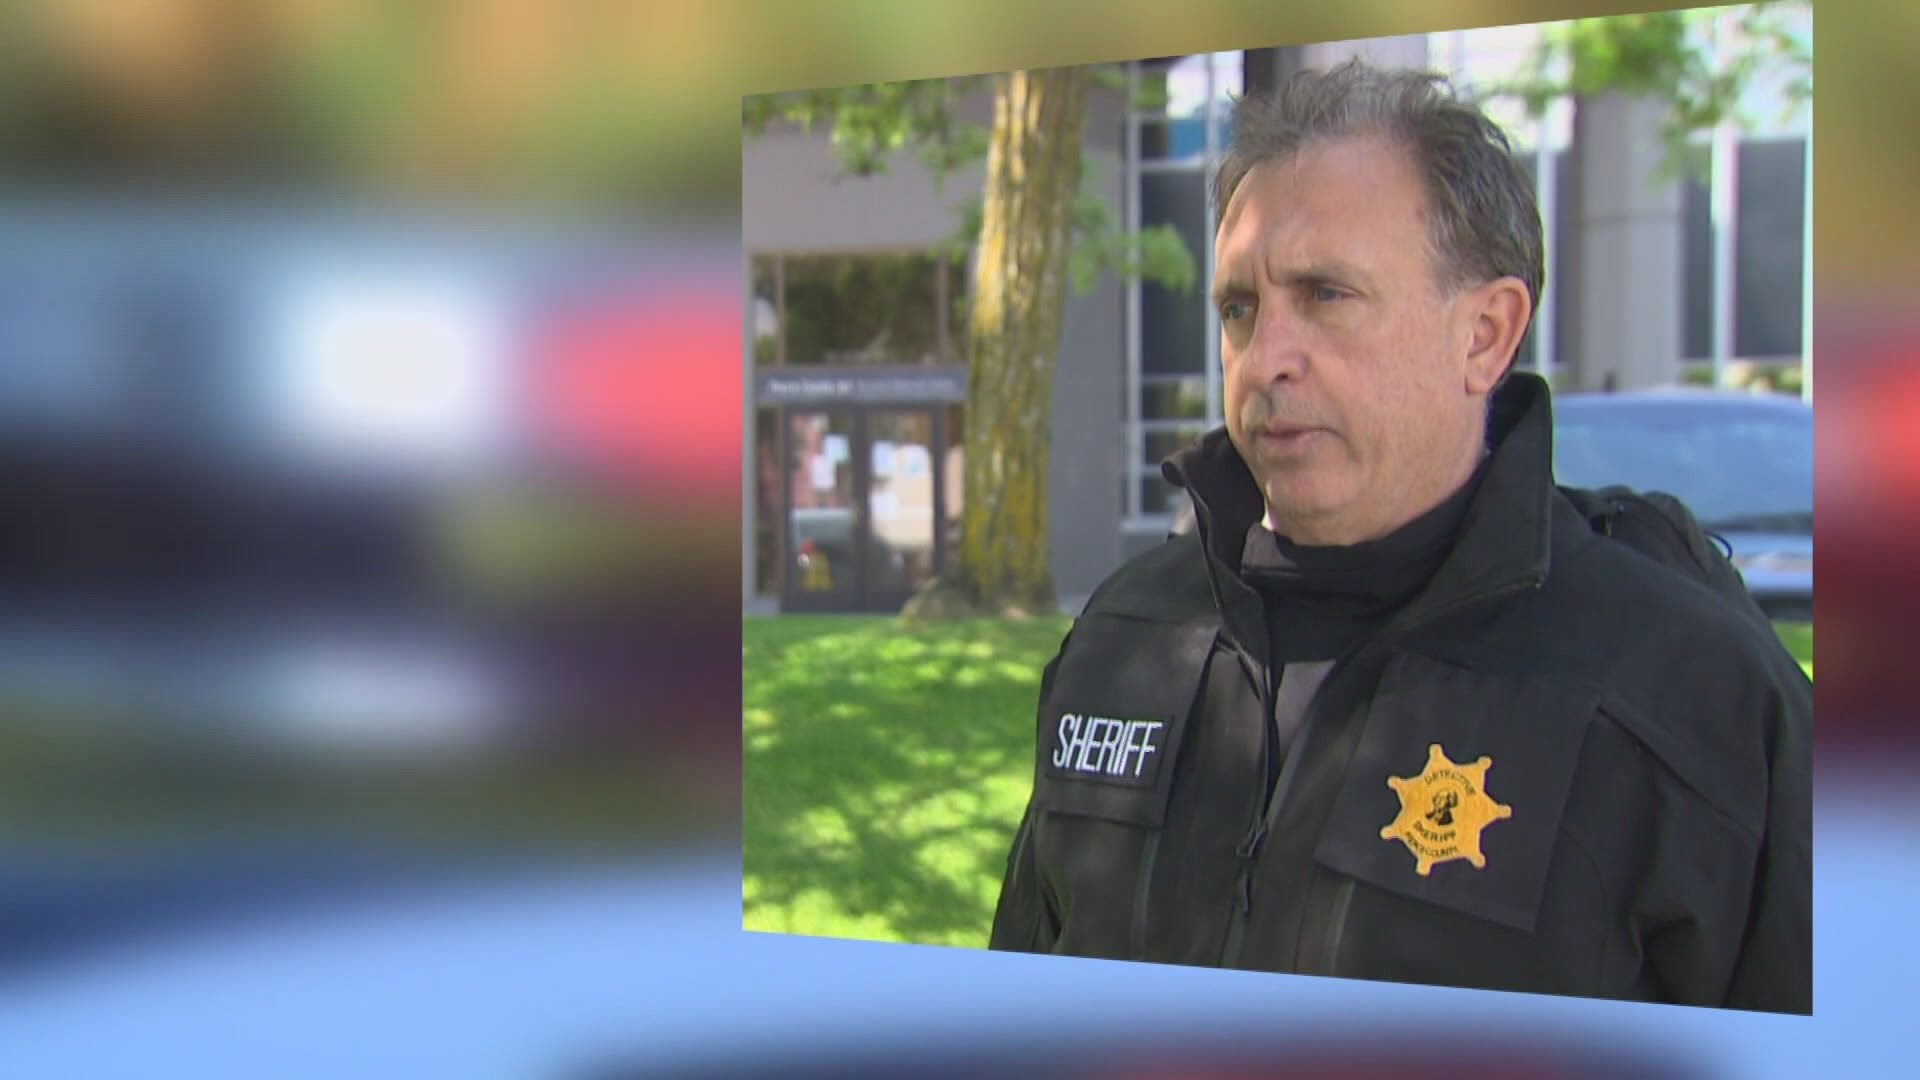 Pierce County Sheriff Ed Troyer told a 911 dispatcher that a newspaper carrier had threatened to kill him. Community activists have called for his resignation.